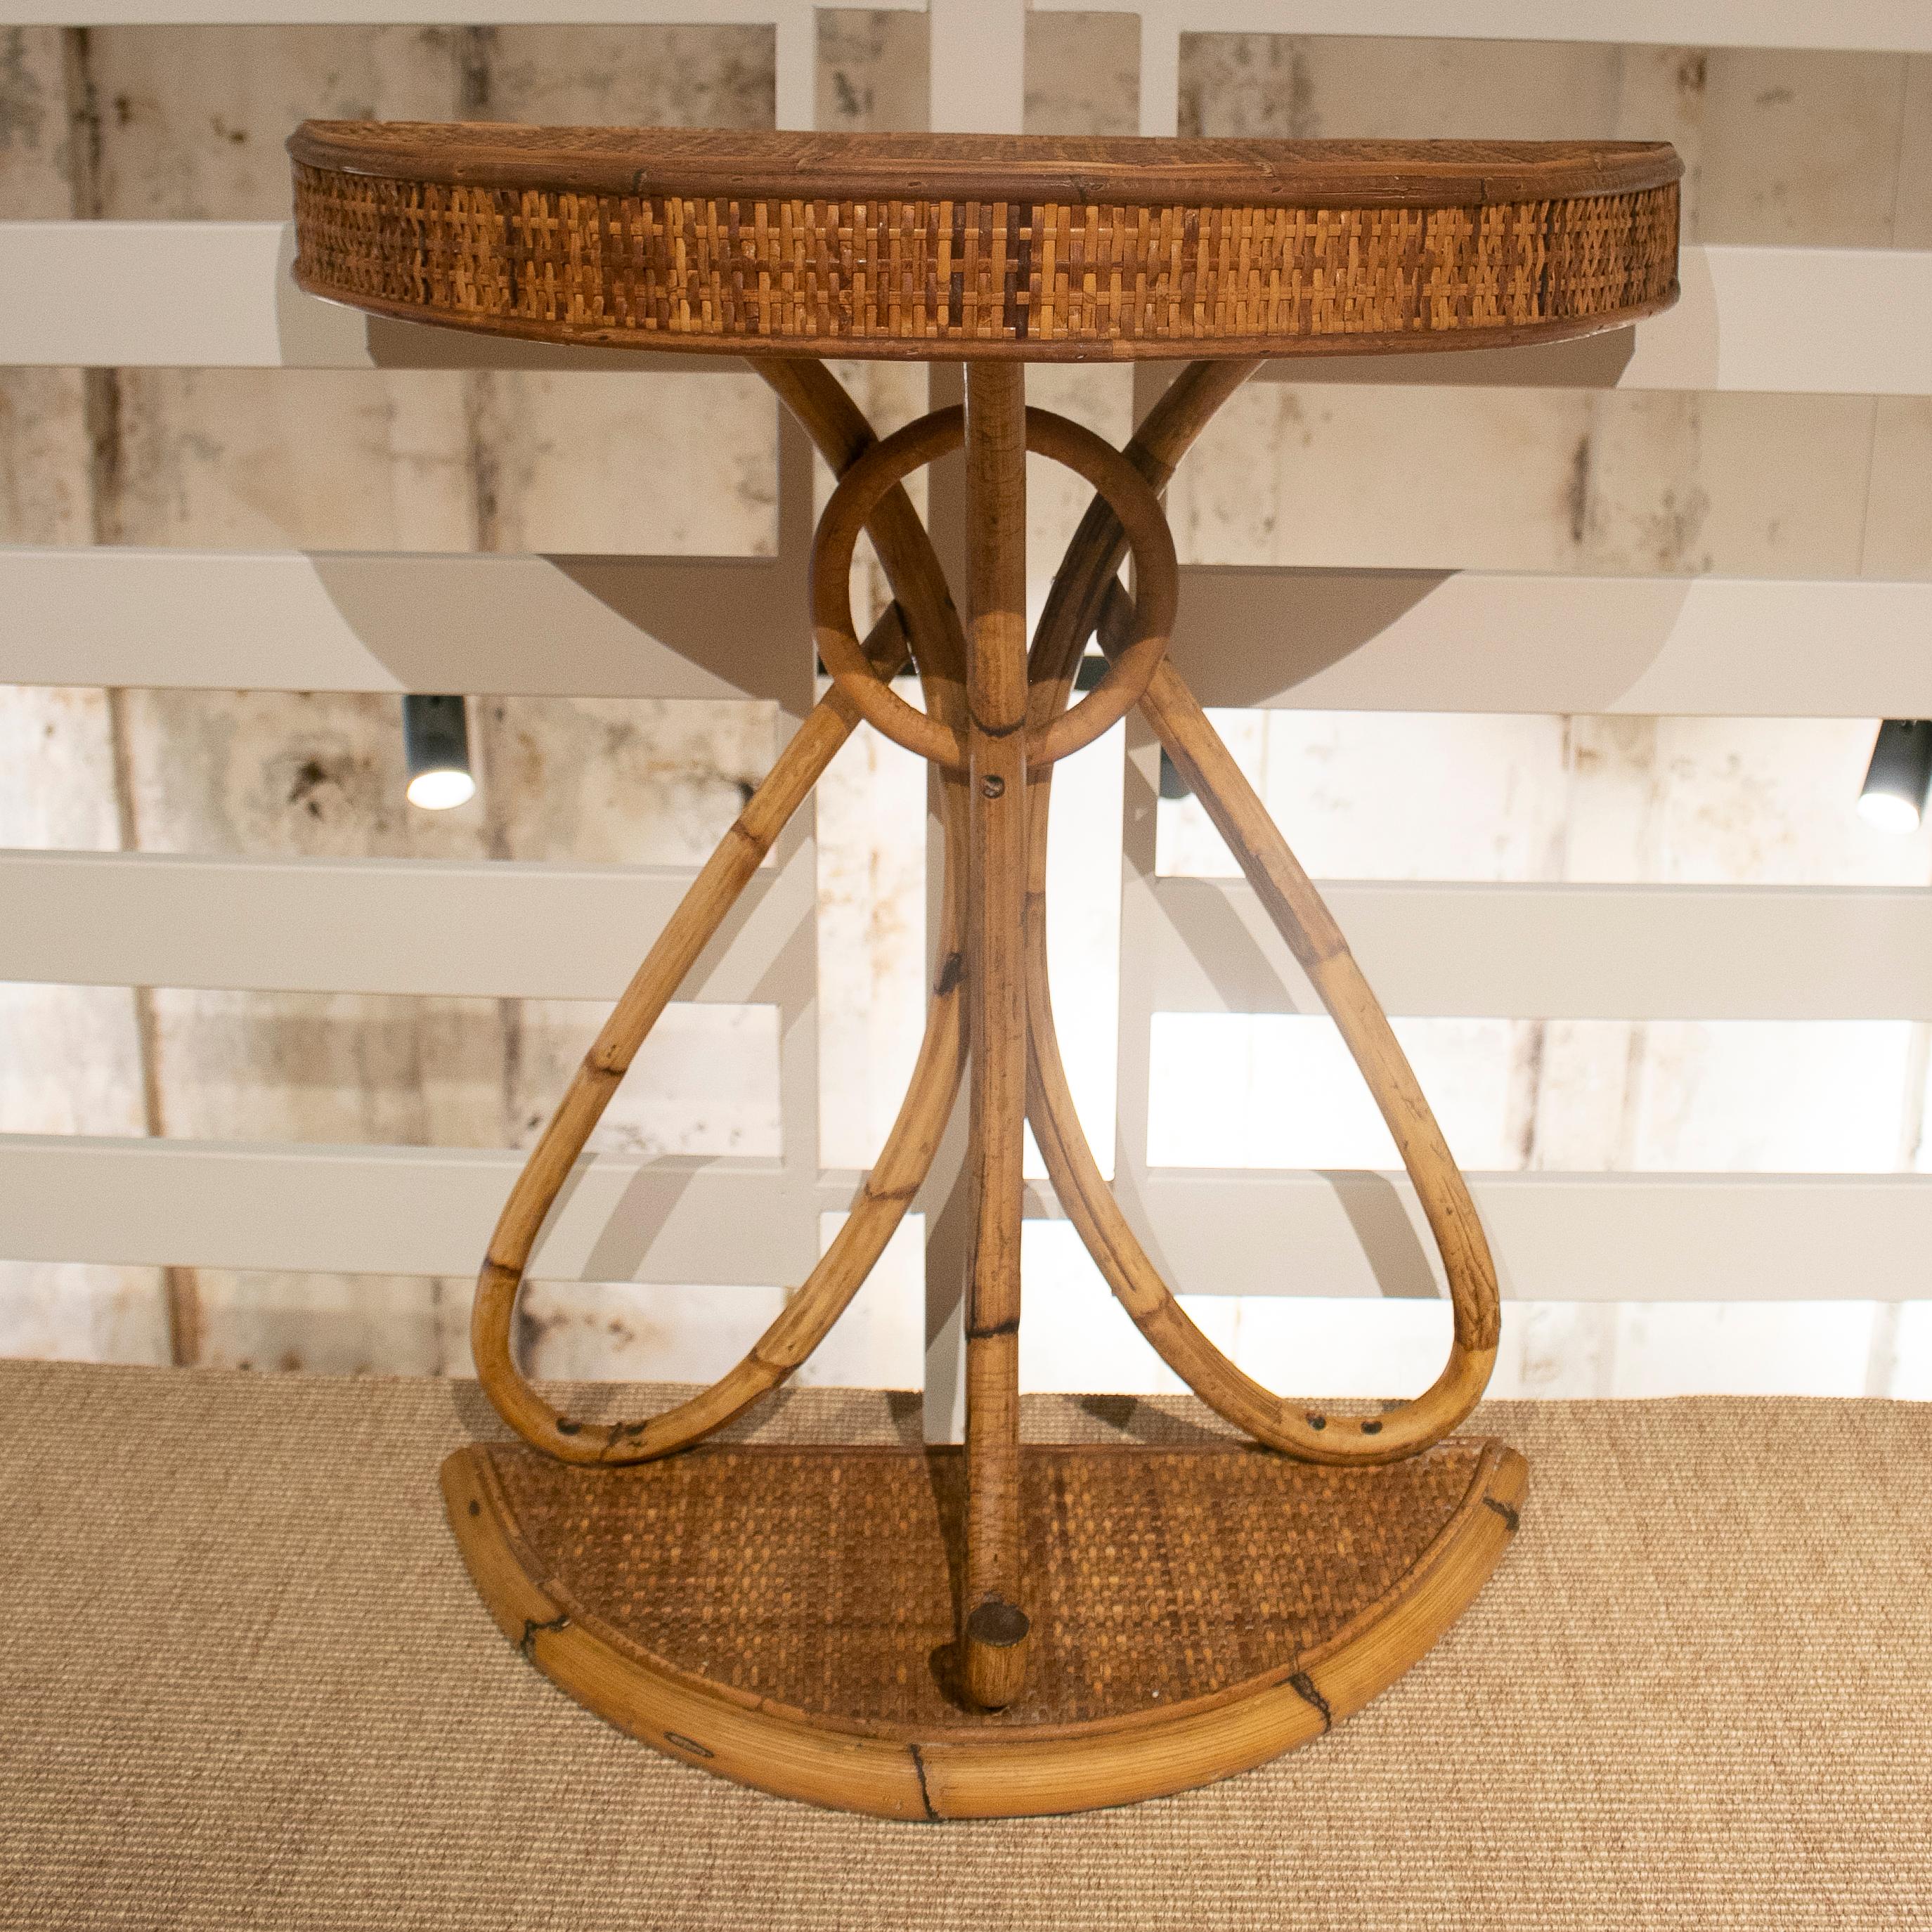 1980s Spanish bamboo and wicker demilune console table.